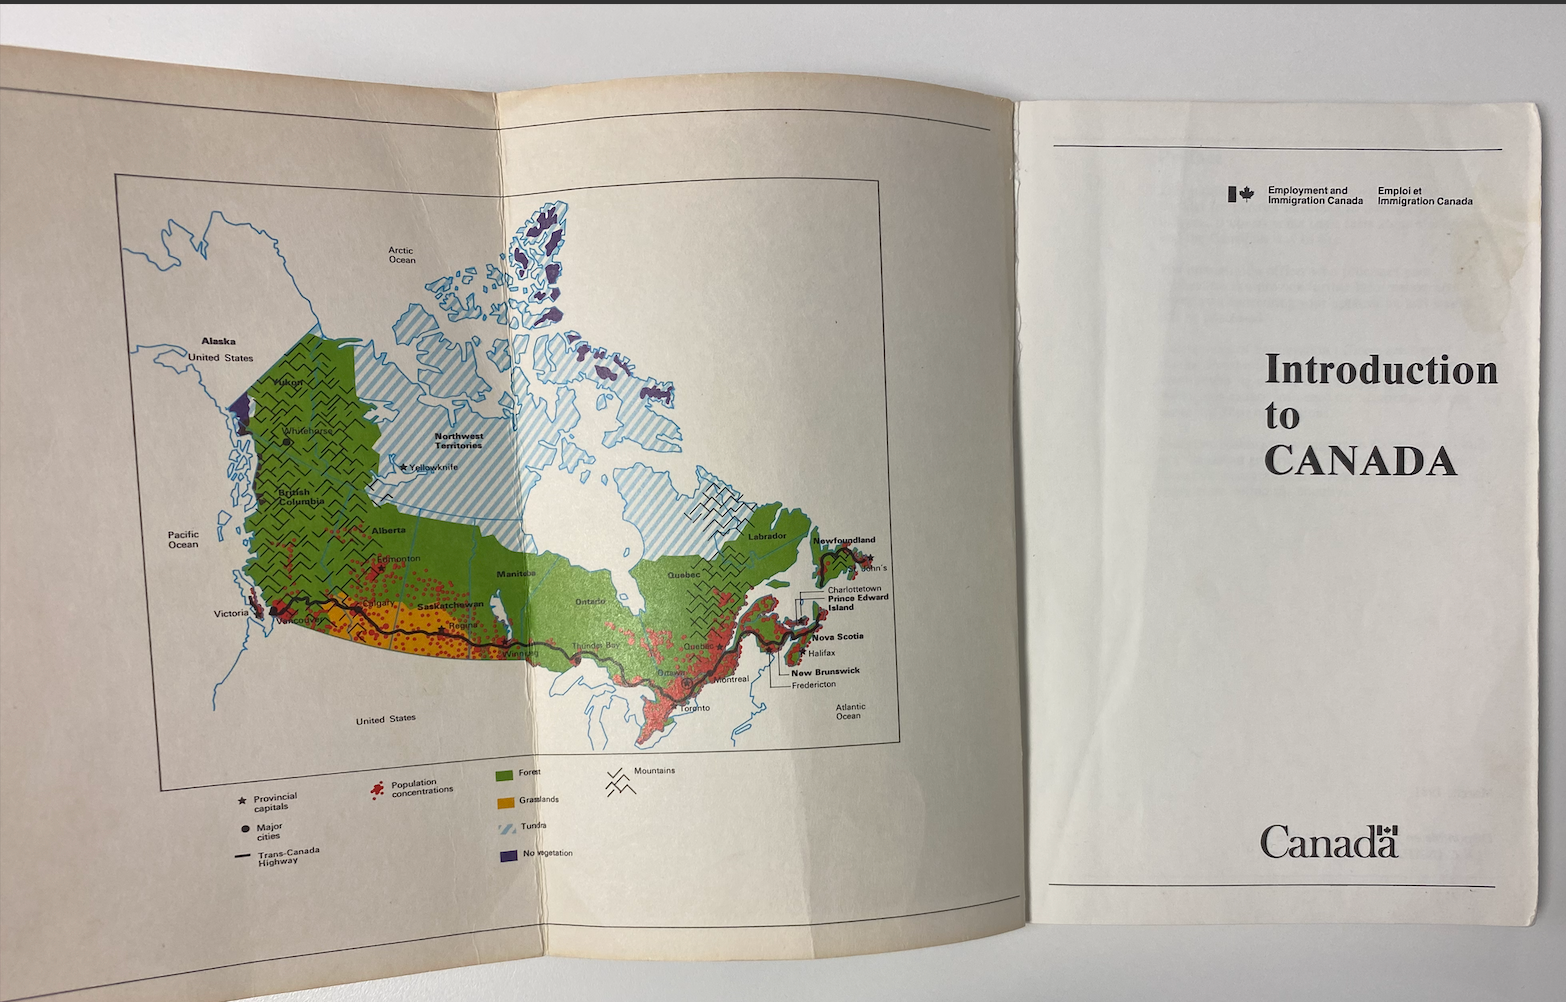 Introduction to Canada Booklet given to Andrzej once he was permitted to come to Canada